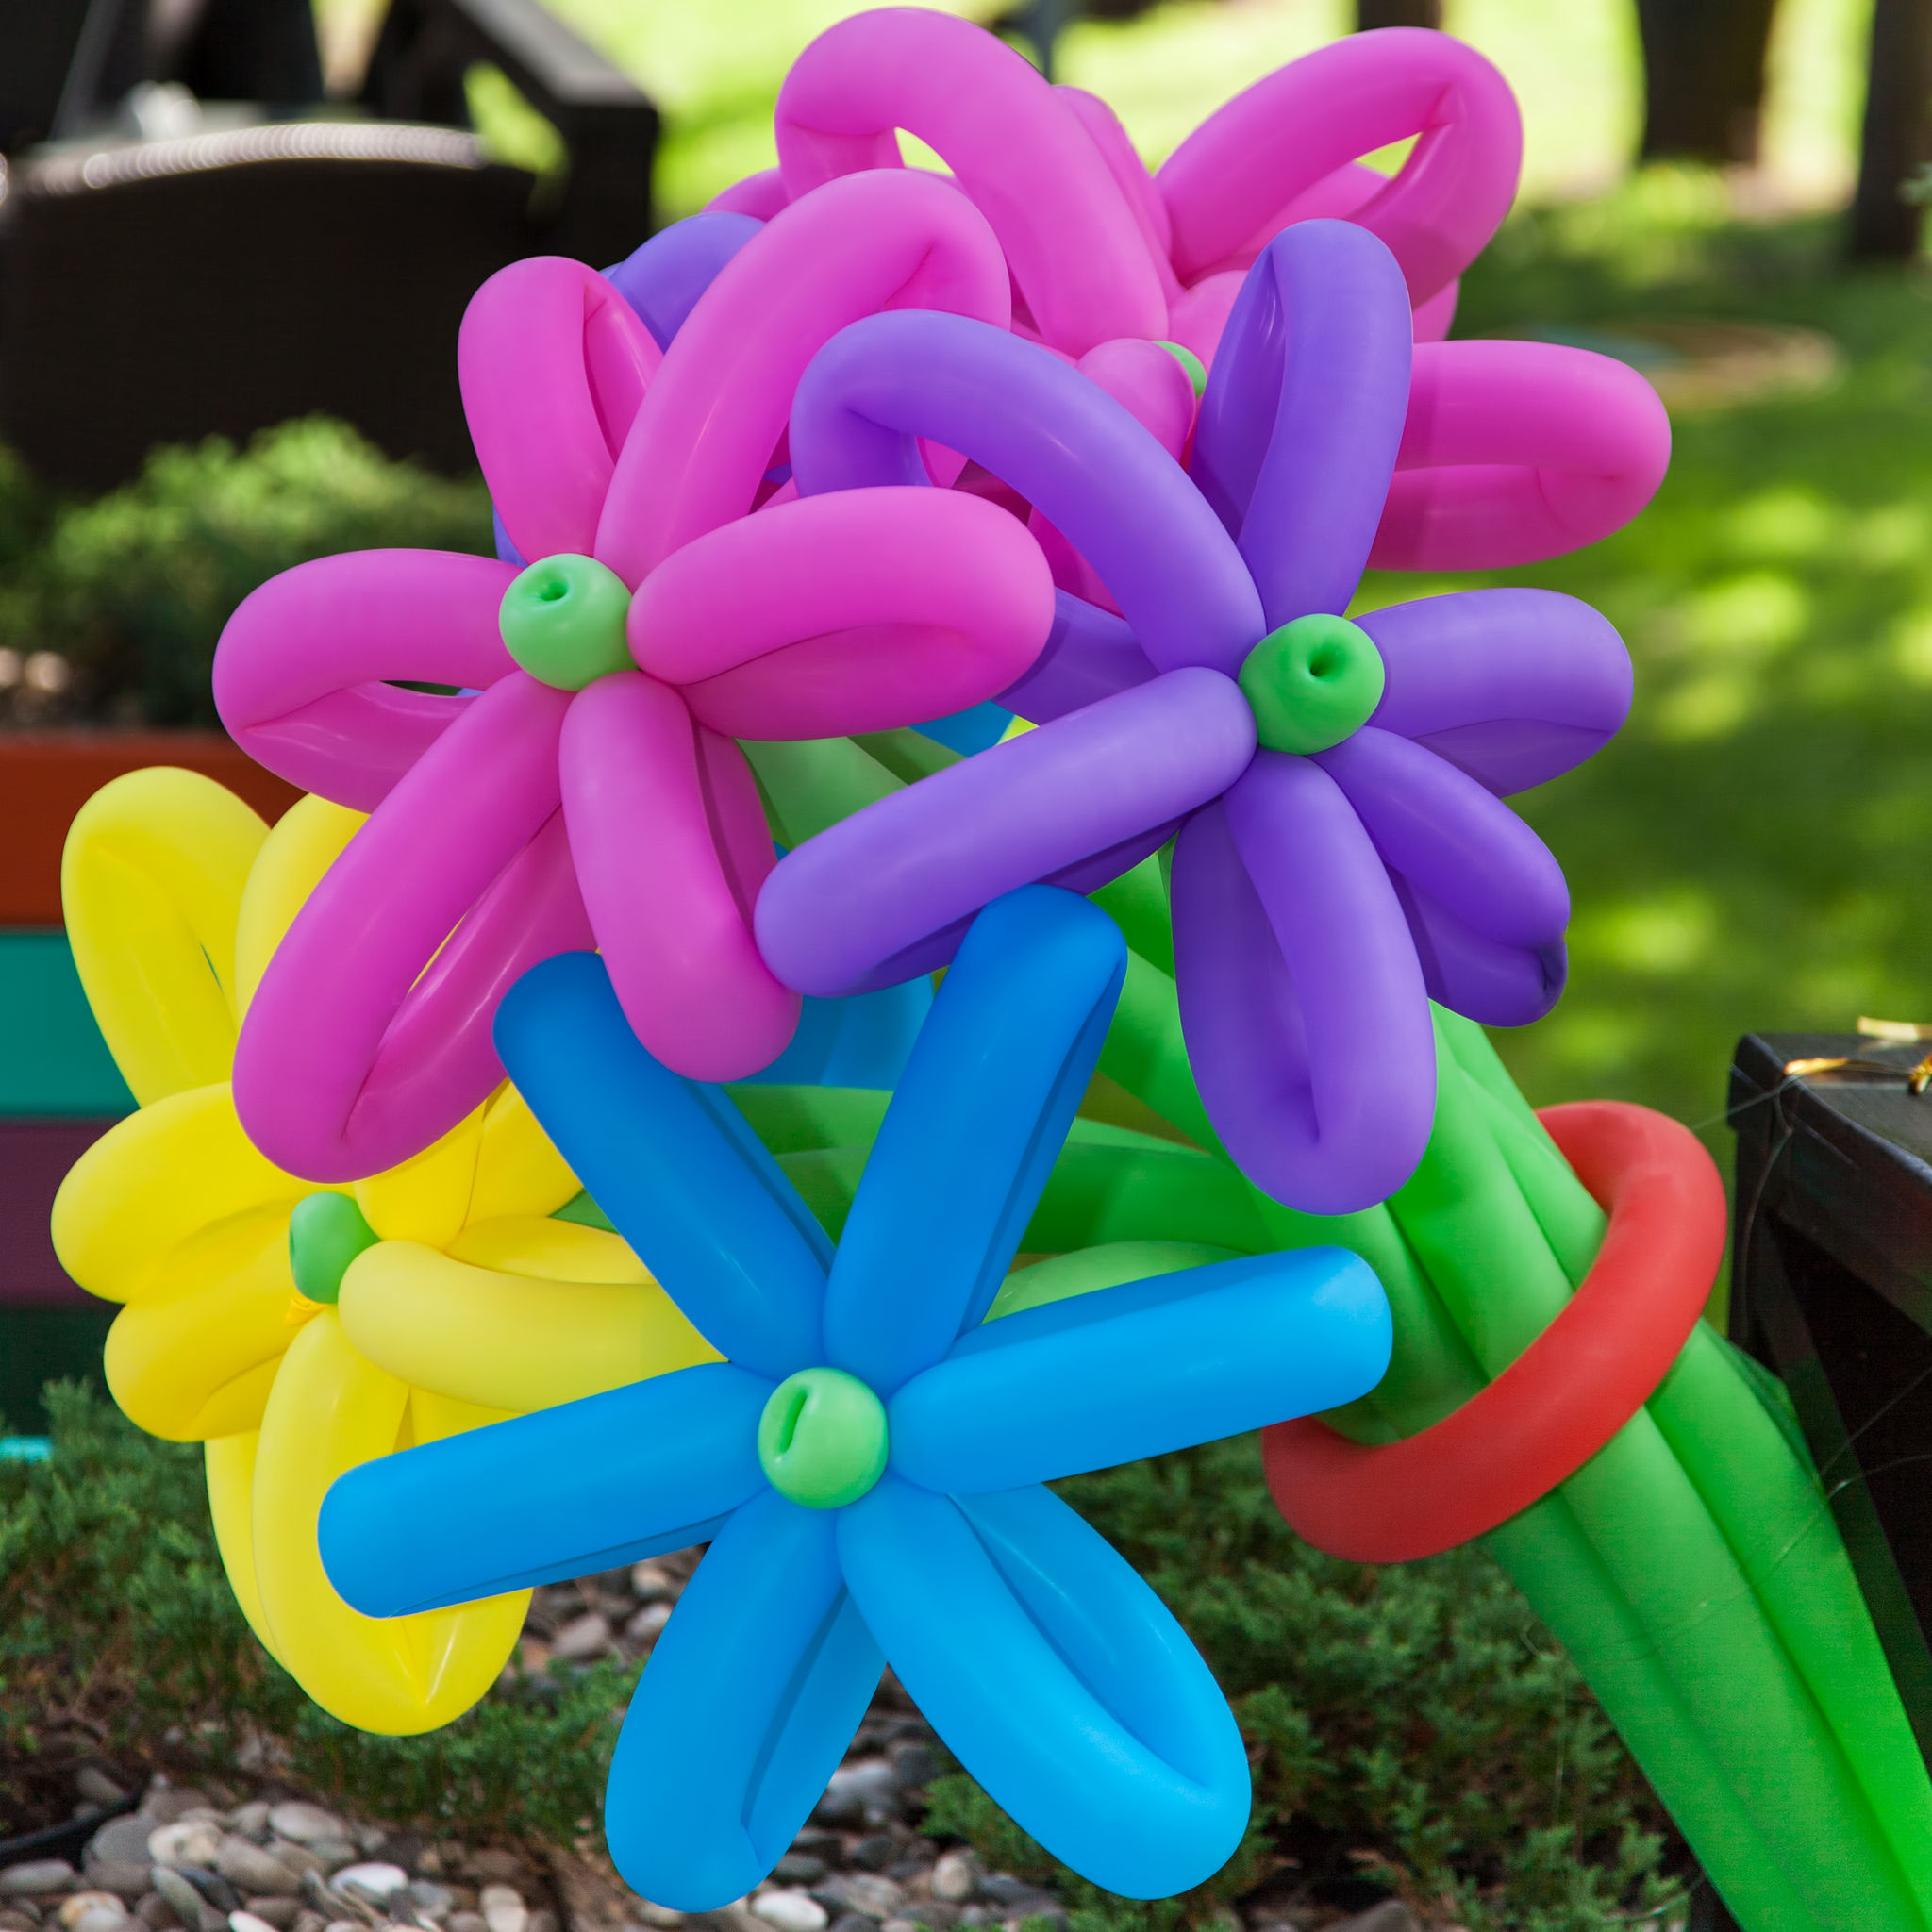 27292656 – balloons shaped in form of flower outdoors